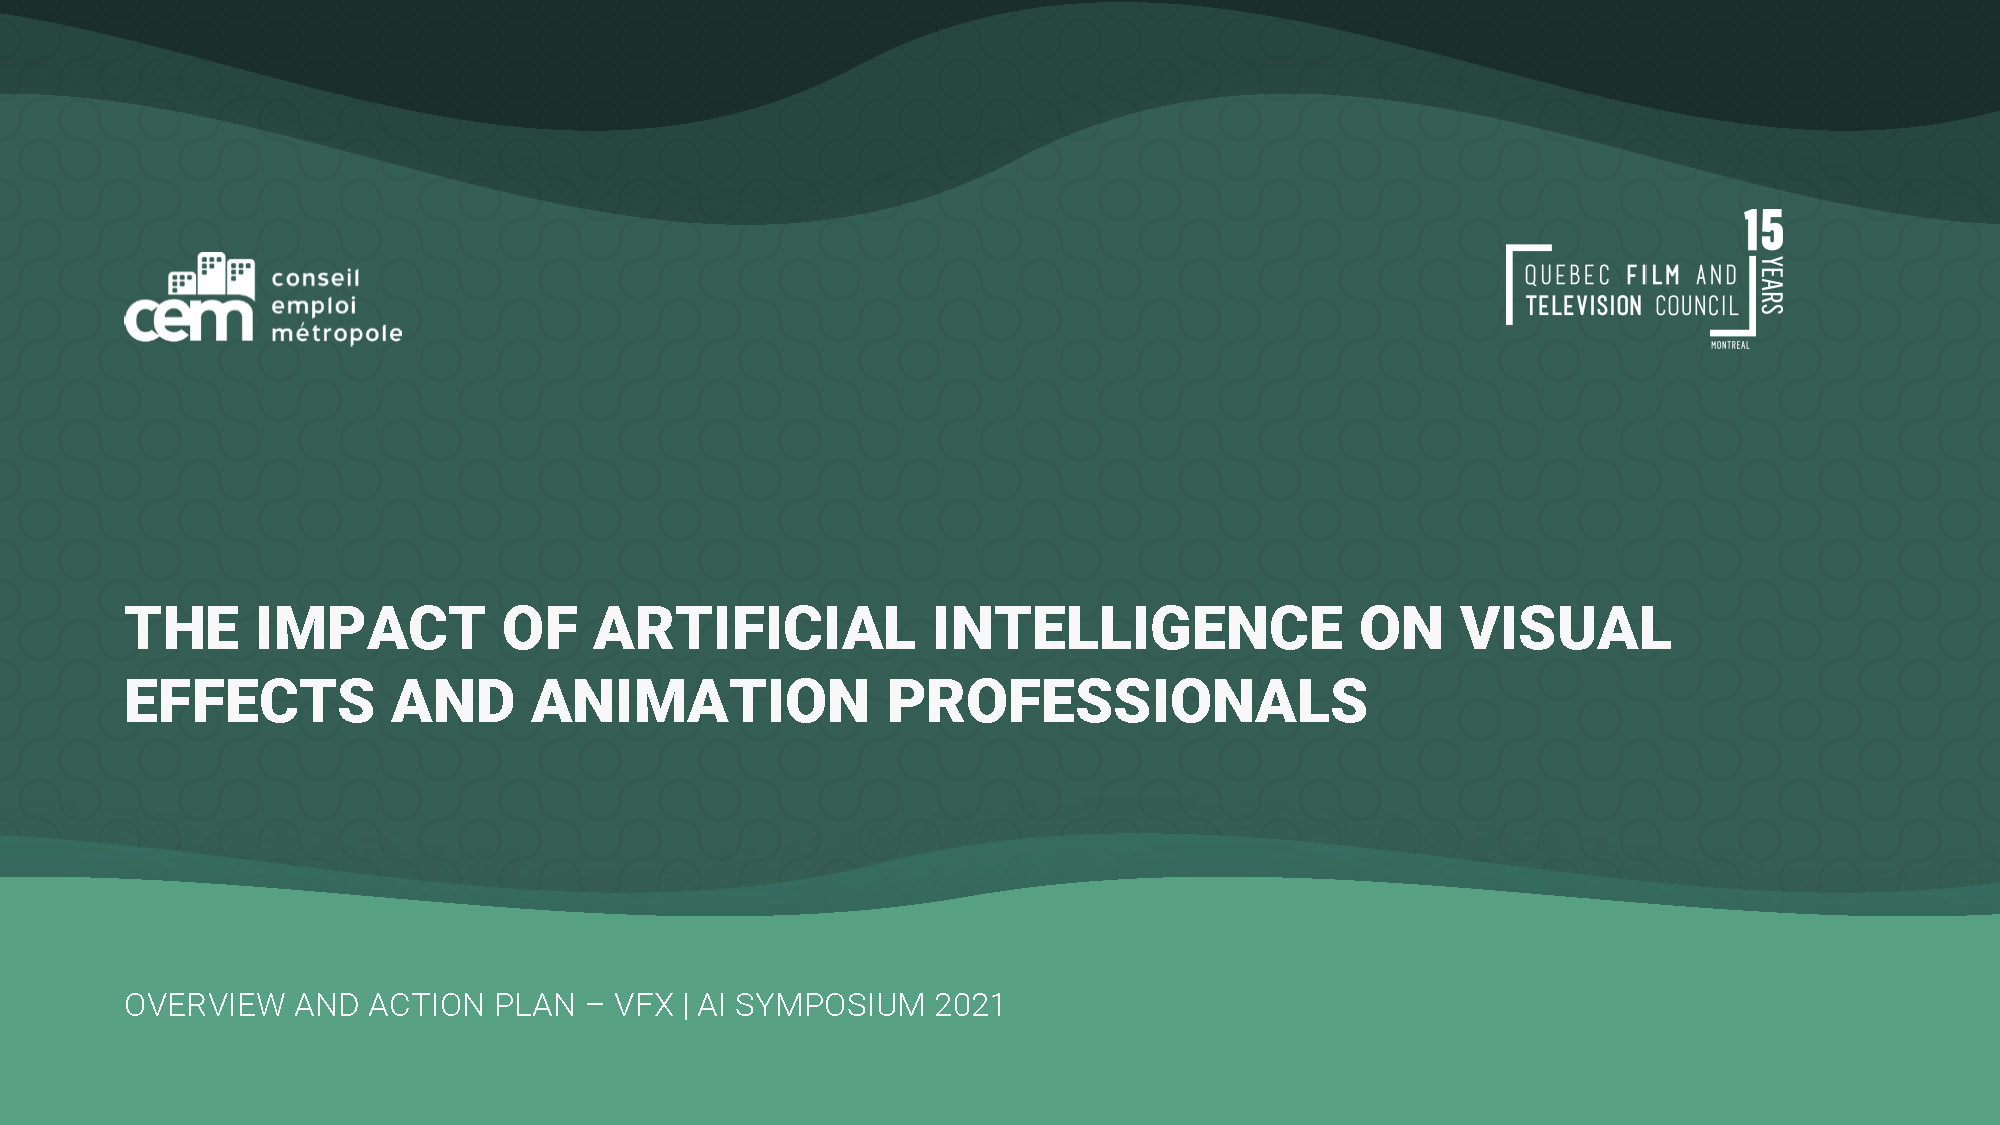 The impact of AI on visual effects and animation professionals